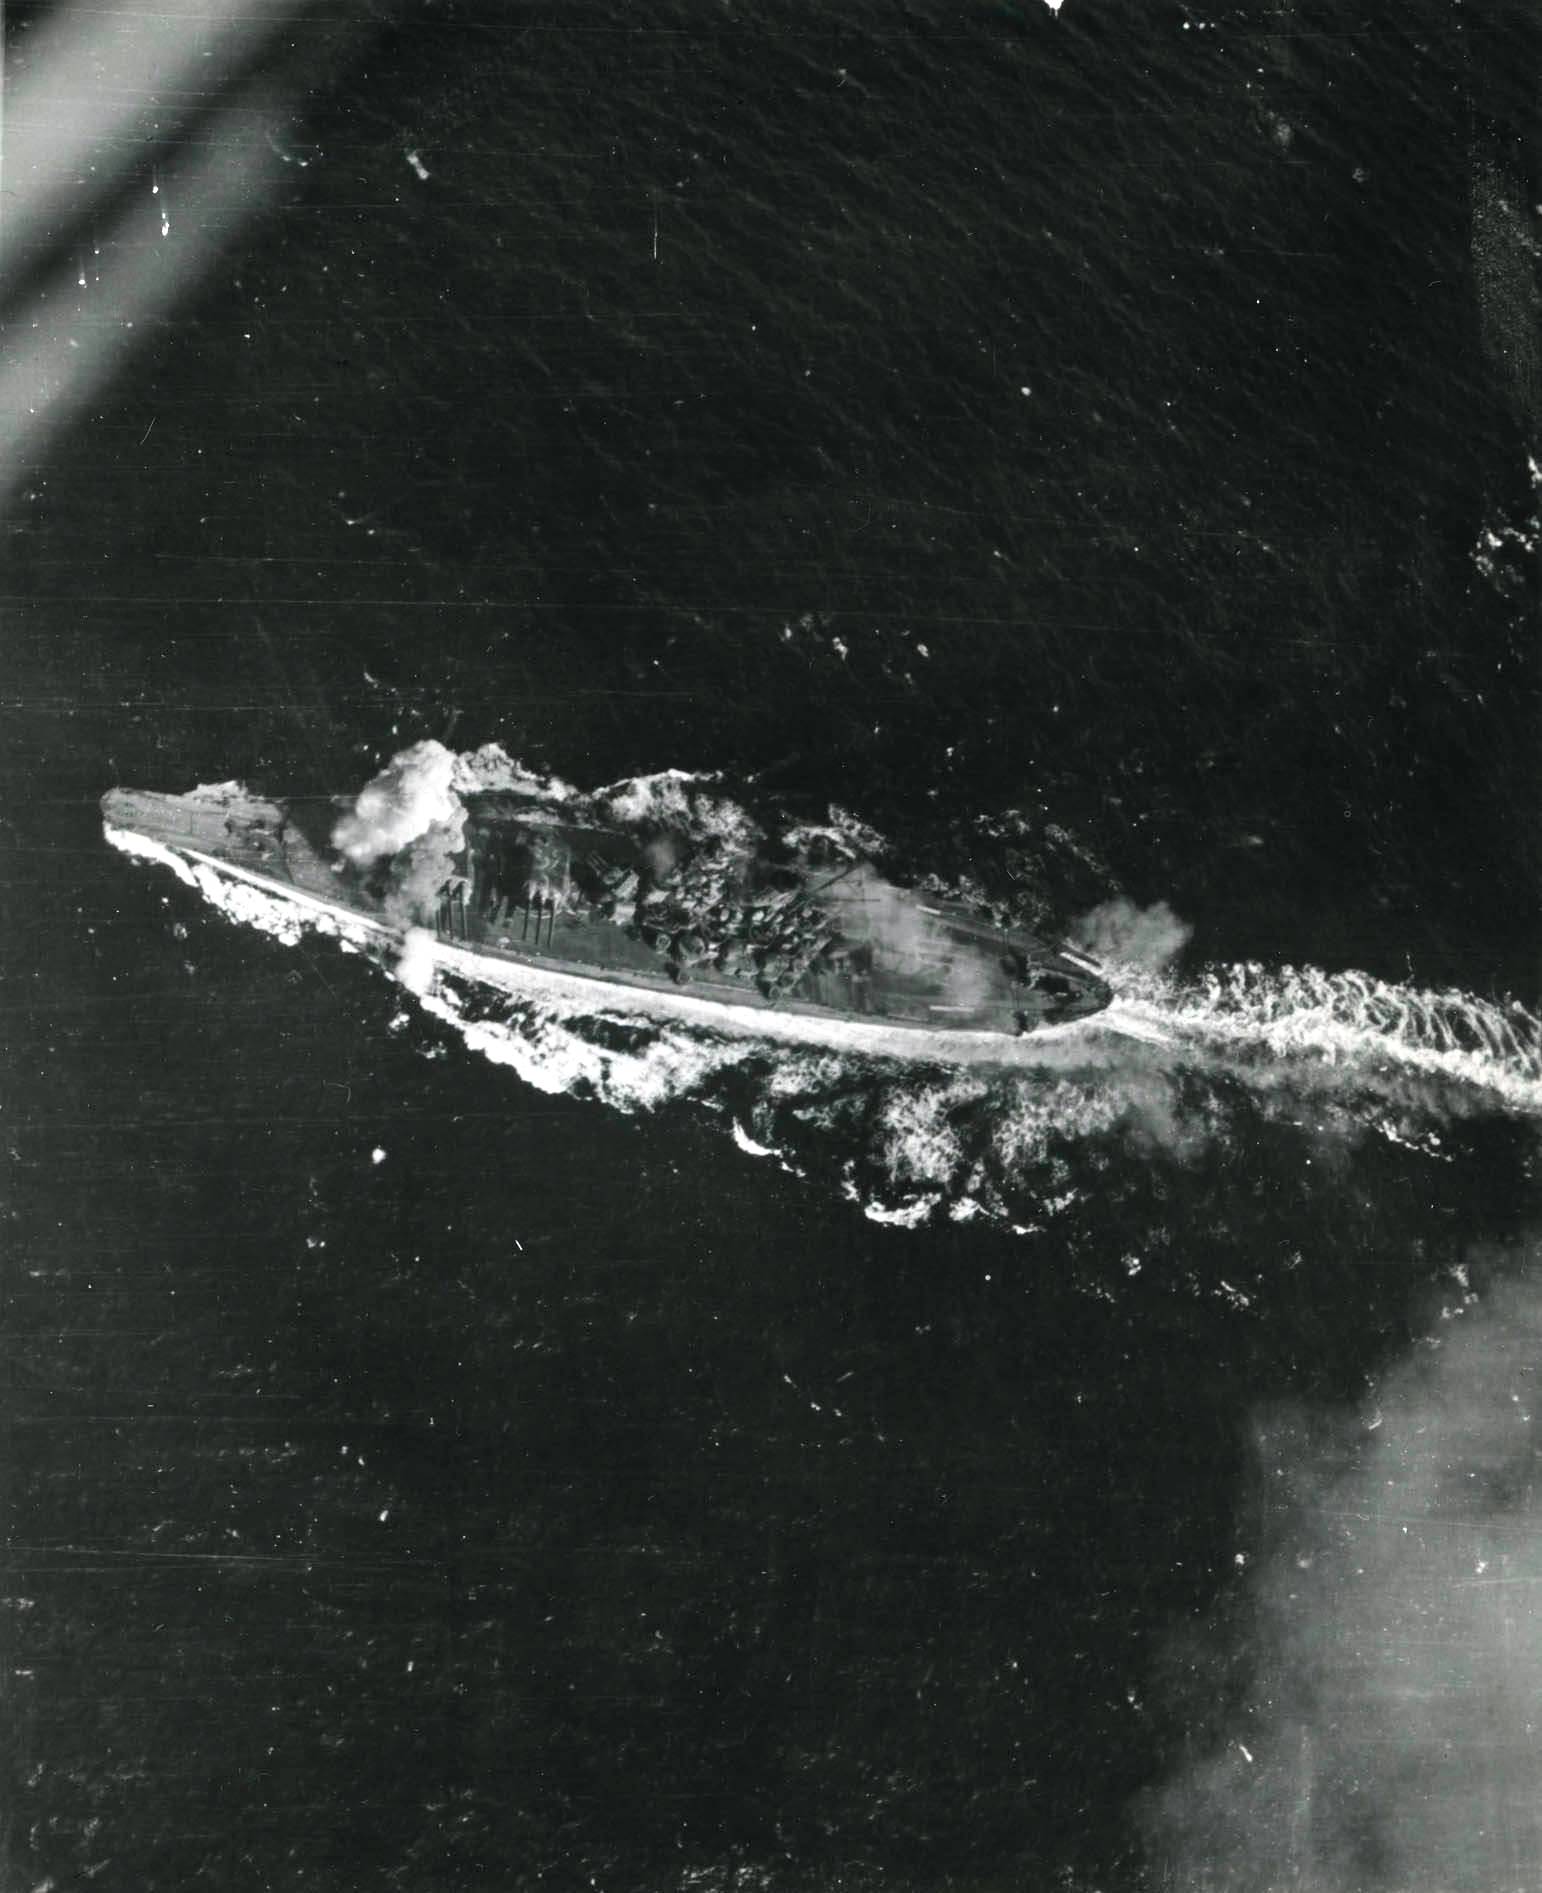 Yamato hit by a bomb in Sibuyan Sea, 24 Oct 1944